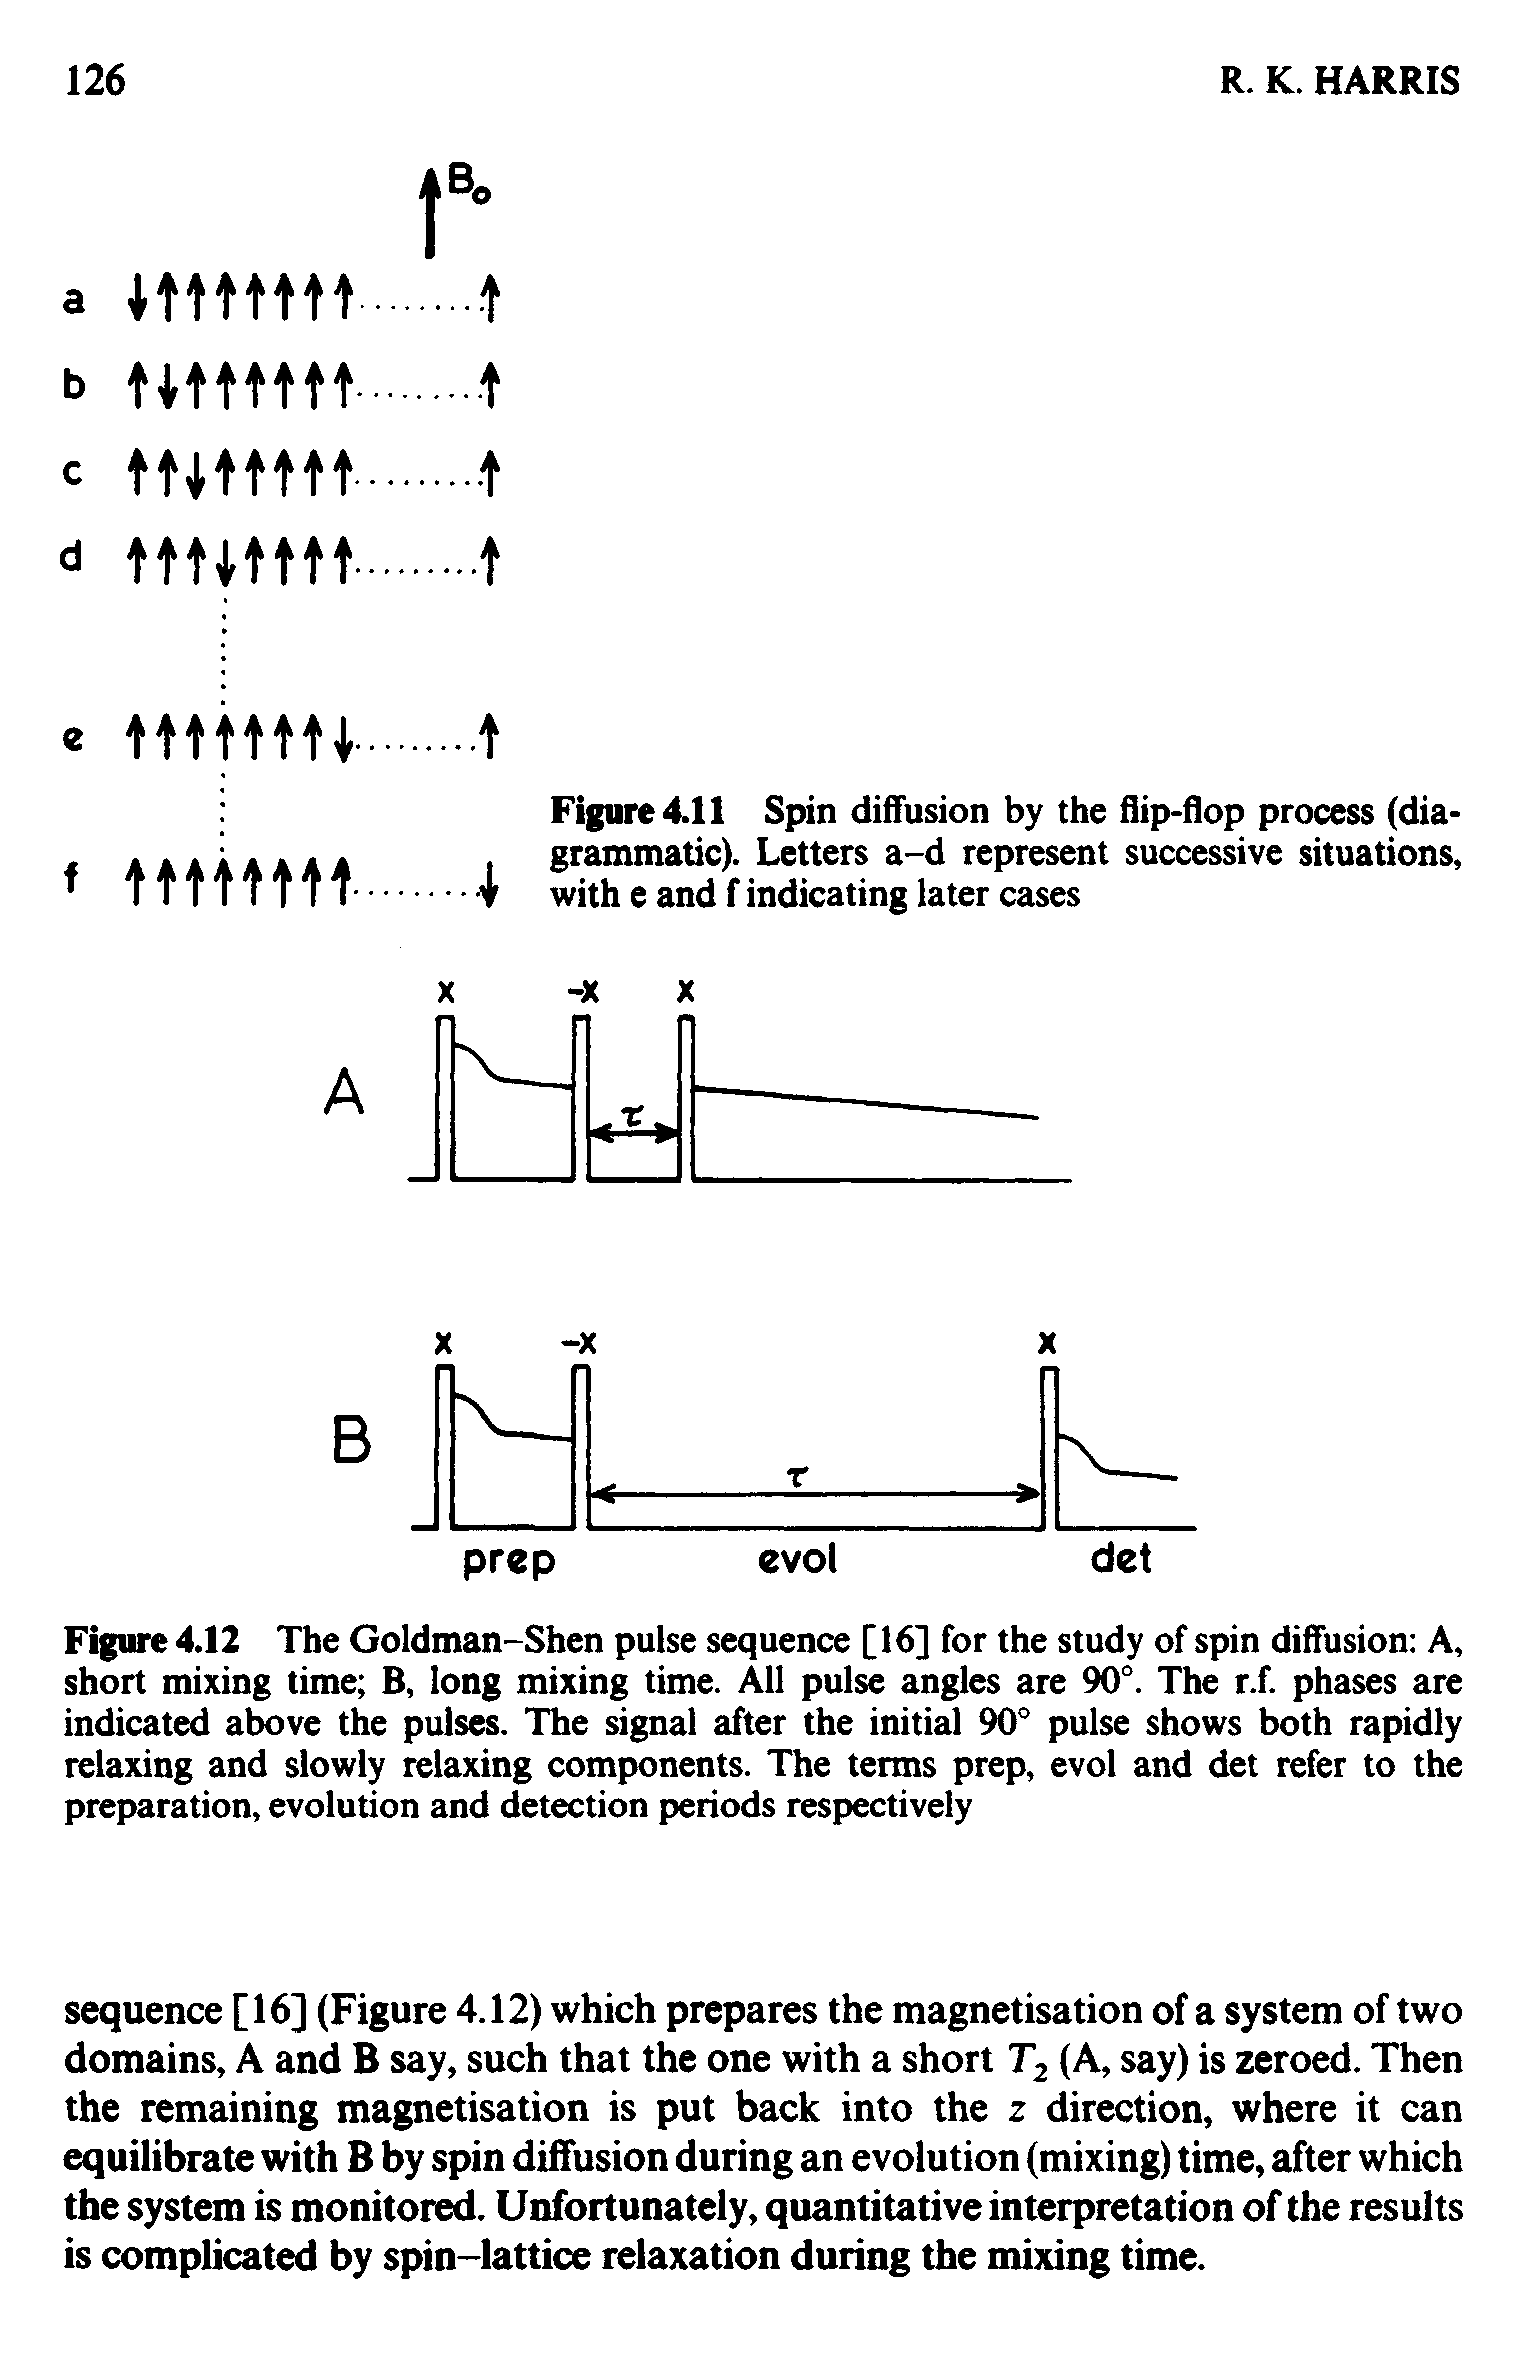 Figure 4.11 Spin diffusion by the flip-flop process (diagrammatic). Letters a-d represent successive situations, with e and f indicating later cases...